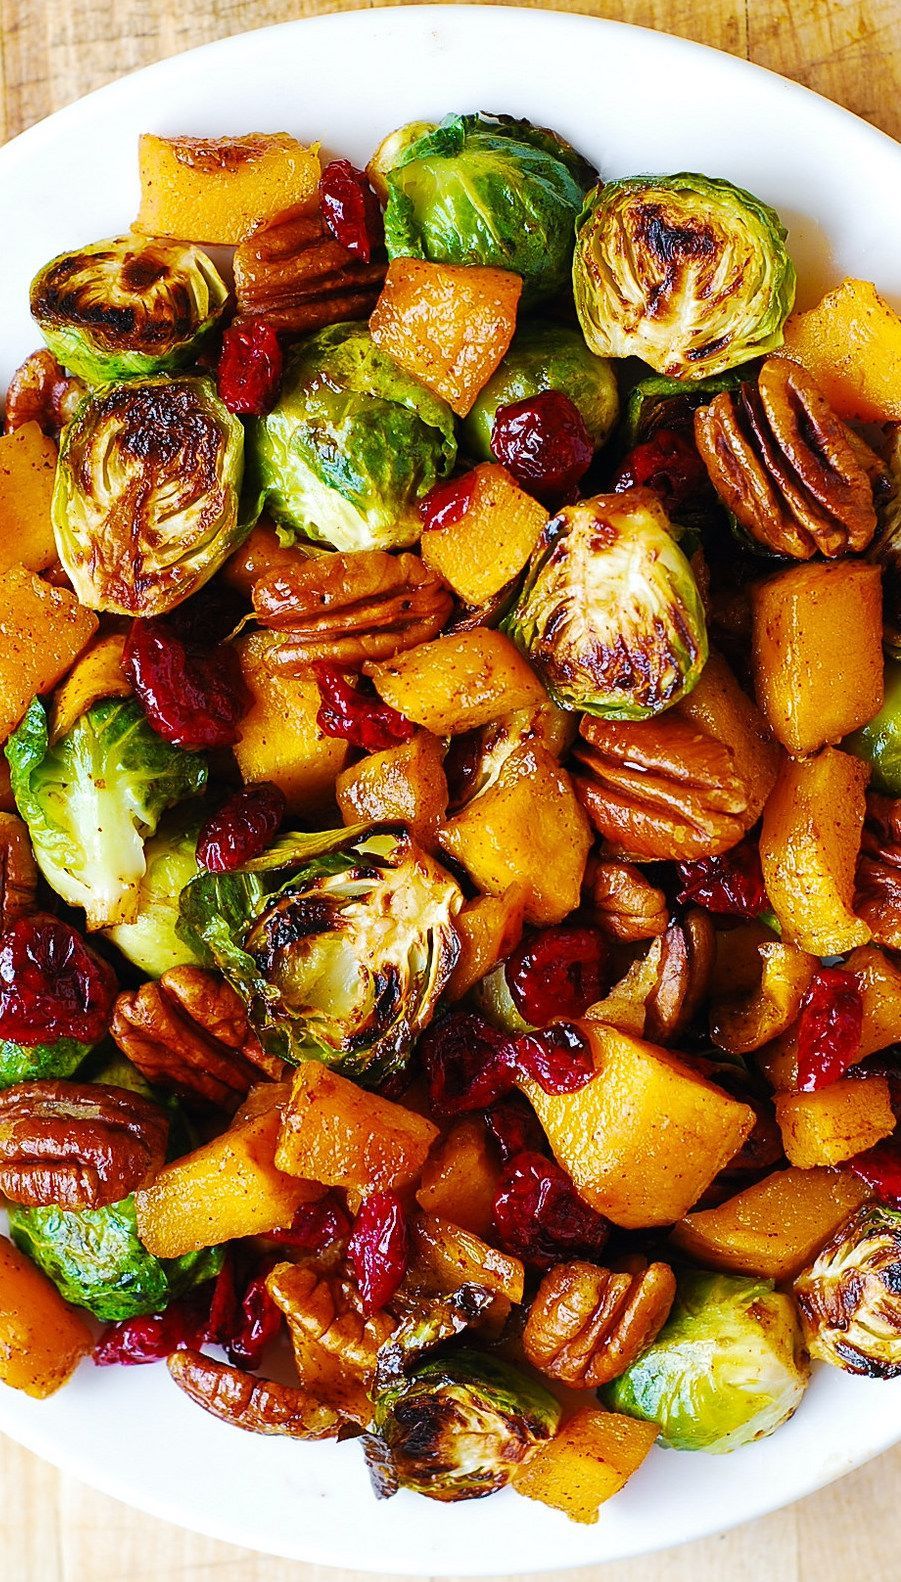 Roasted Butternut Squash and Brussels sprouts with Pecans and Cranberries -   18 thanksgiving recipes ideas